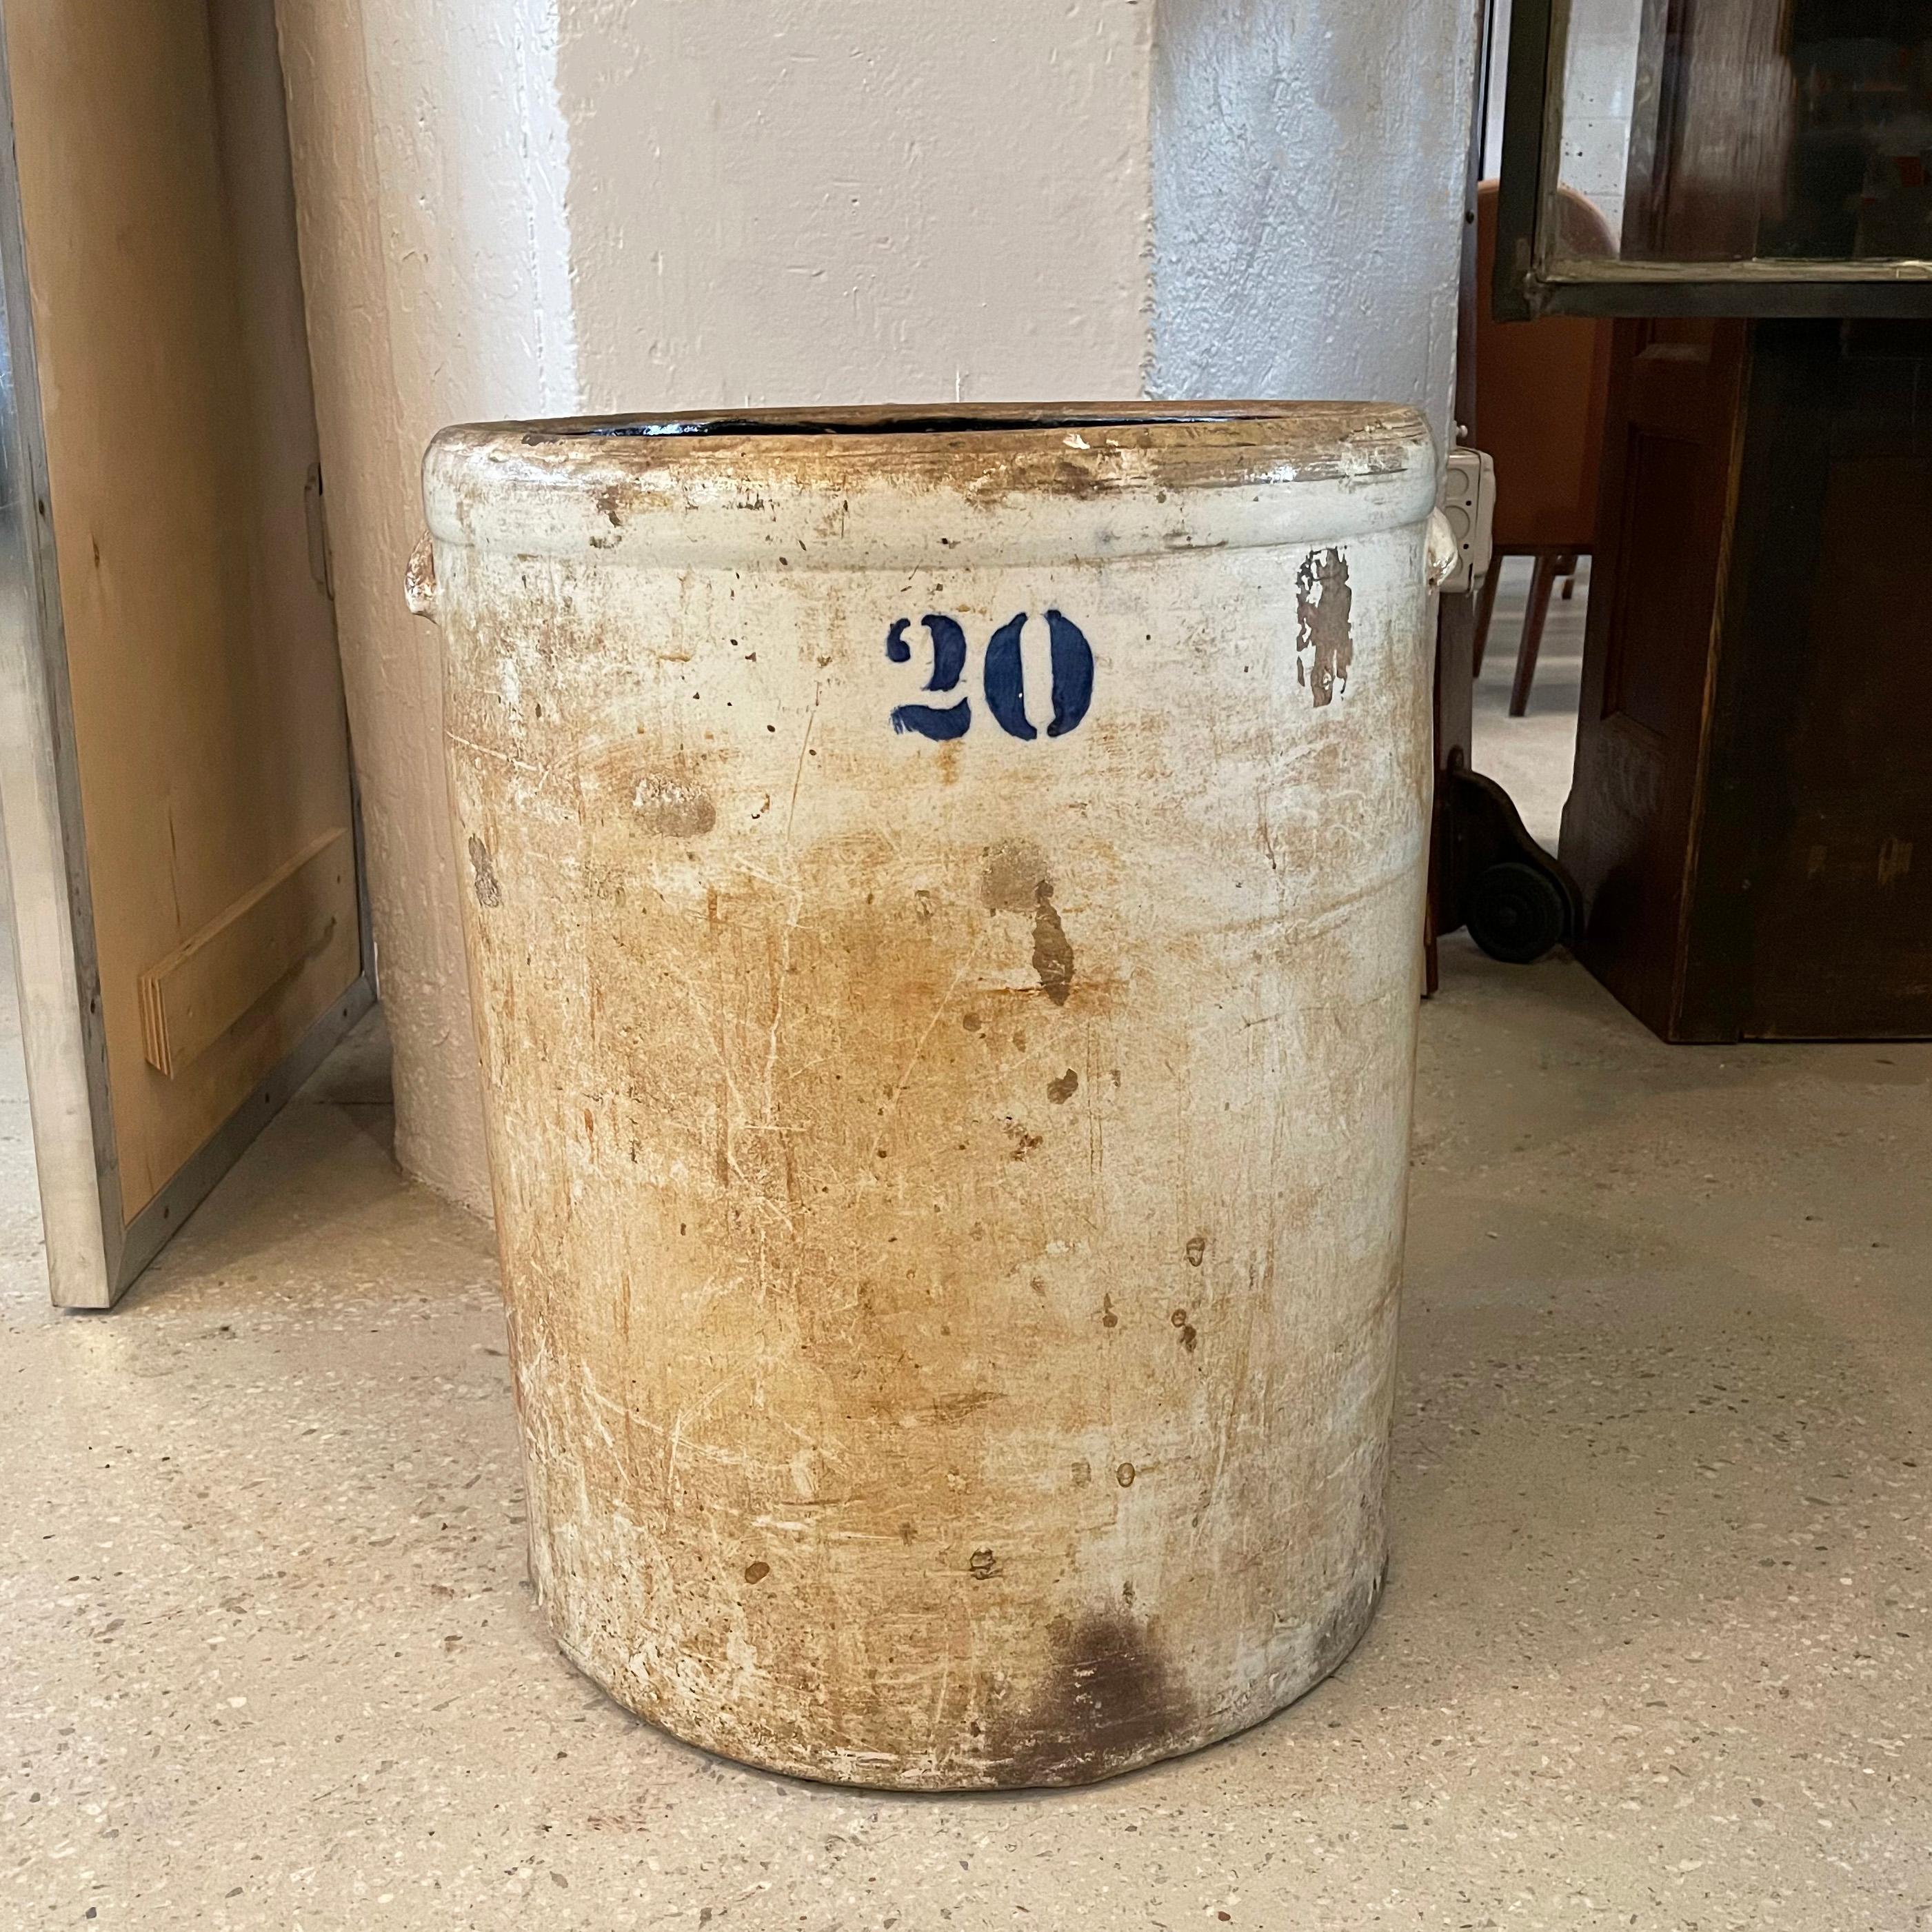 Large, 19th century, 20 gallon, rustic, stoneware, pickling crock vessel with handles.